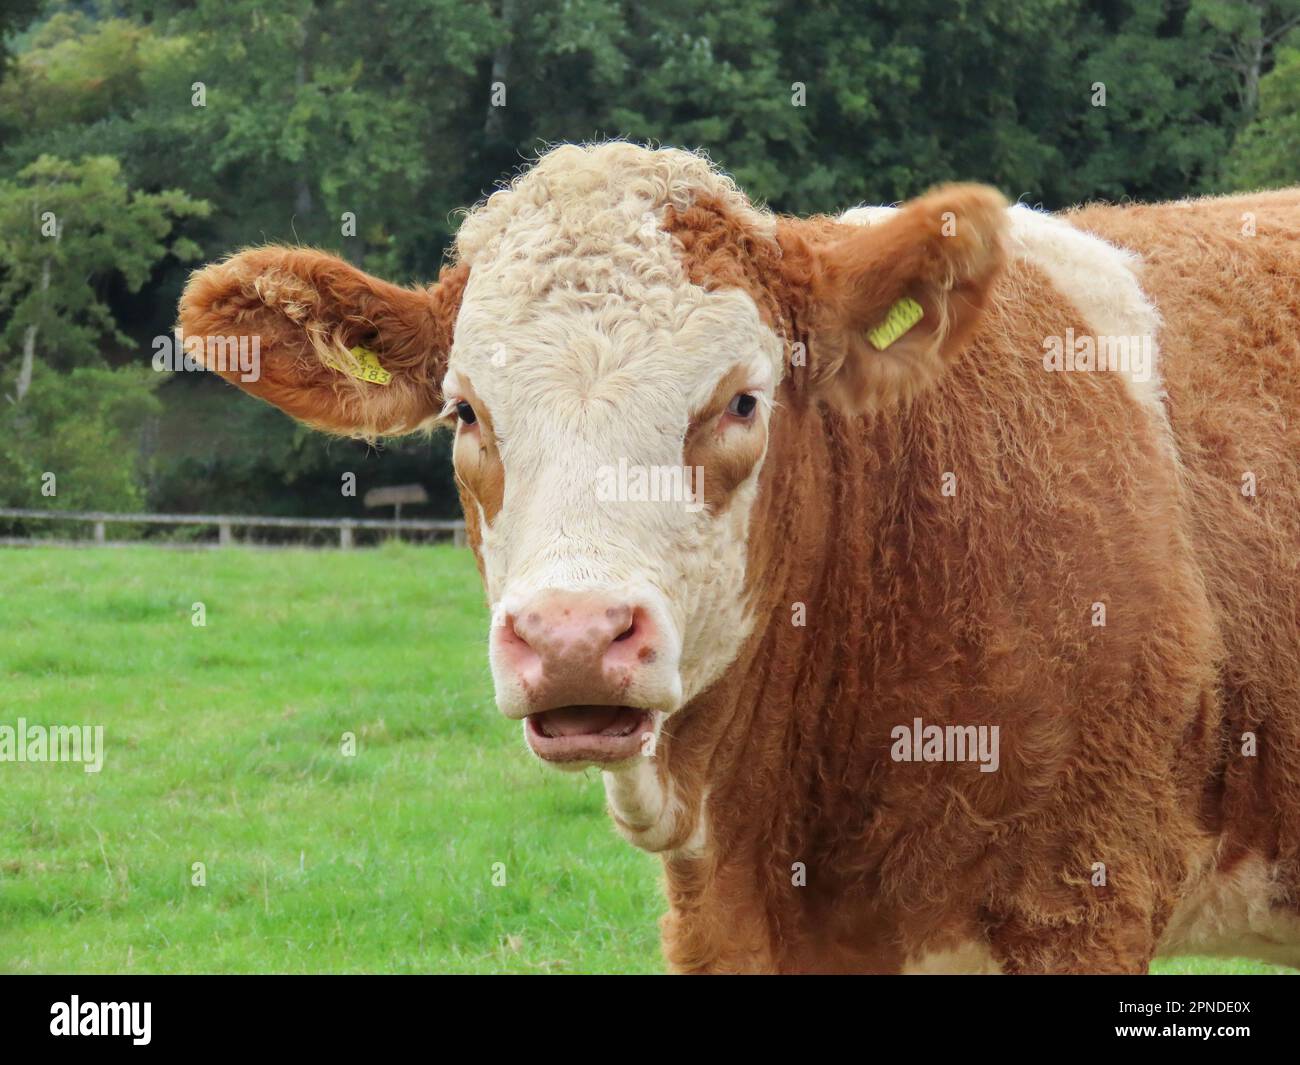 close of portrait of a brown and white cow Stock Photo